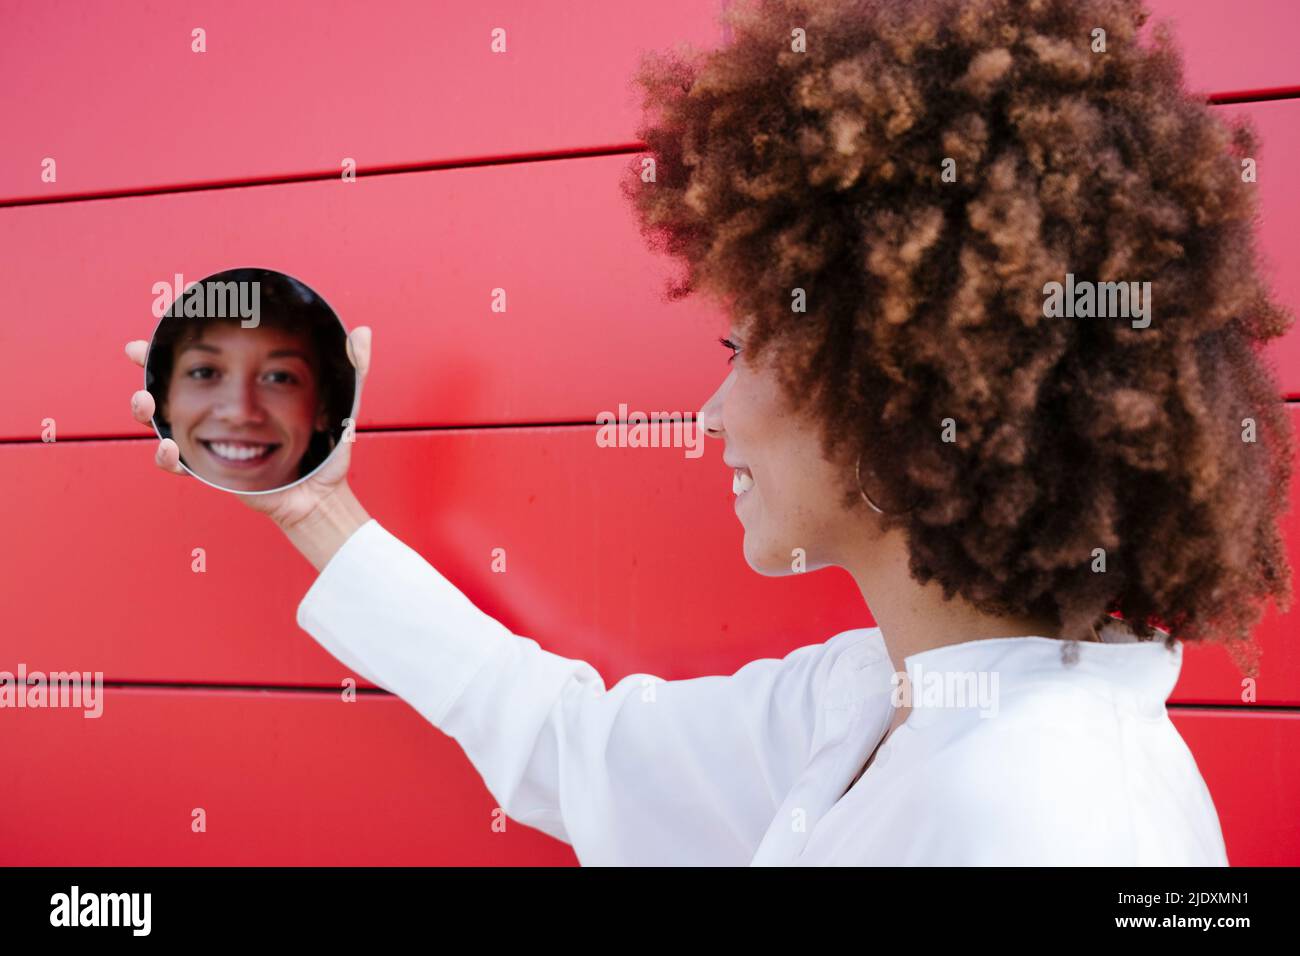 Reflection of woman's face on circular mirror by red wall Stock Photo